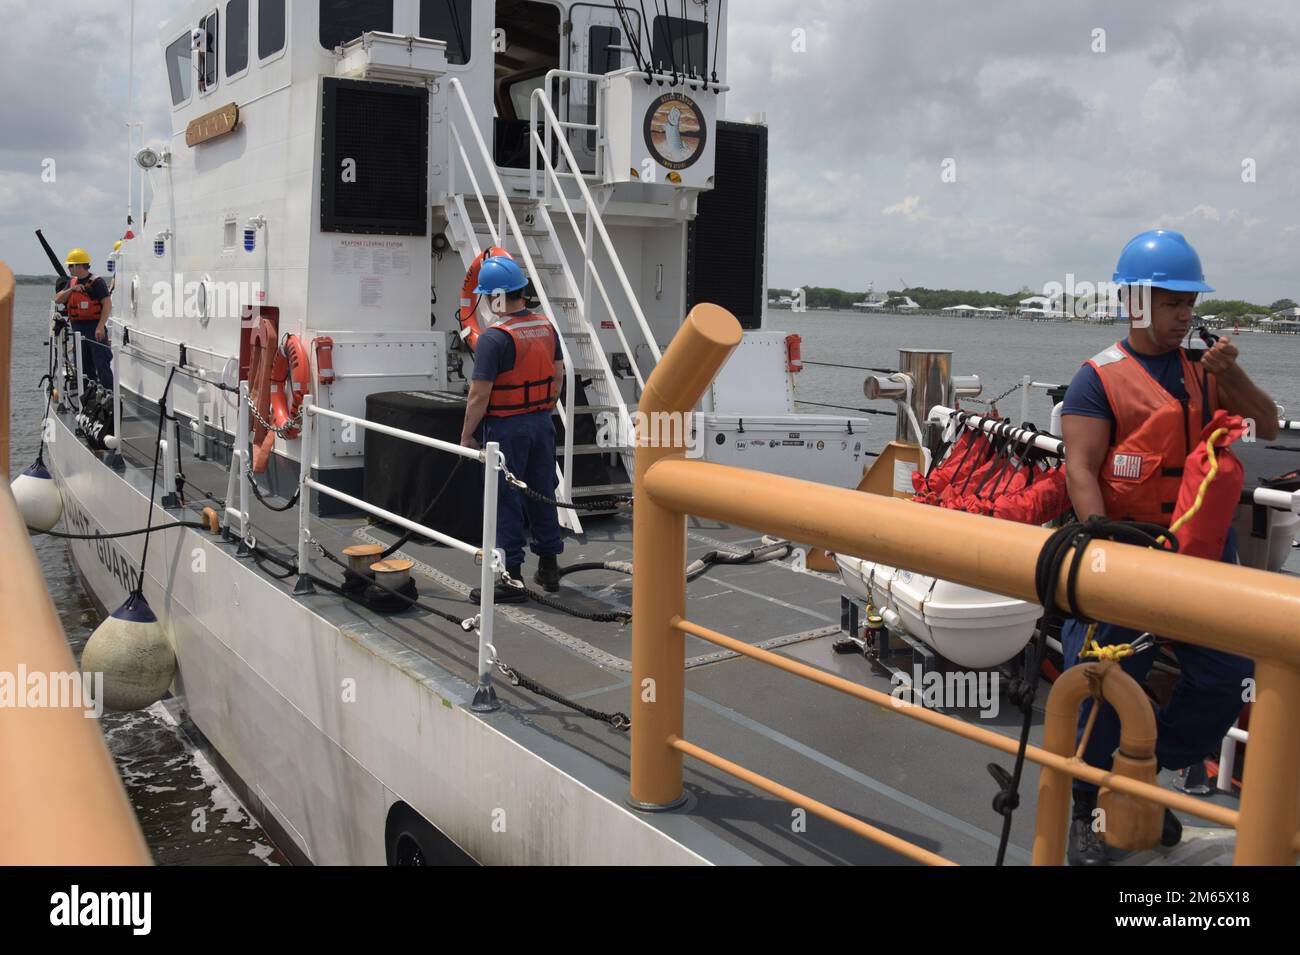 U.S. Coast Guardsmen assigned to the coastal patrol boat USCGC Tarpon (WPB 87310), pull in mooring lines while getting underway from Coast Guard Sector Jacksonville, Florida, April 5, 2022. The Tarpon is an 87-foot marine-protector class patrol boat capable of performing search and rescue, law enforcement, fishery patrols, drug interdiction, illegal immigrant interdiction and homeland security duties up to 200 nautical miles offshore. Stock Photo